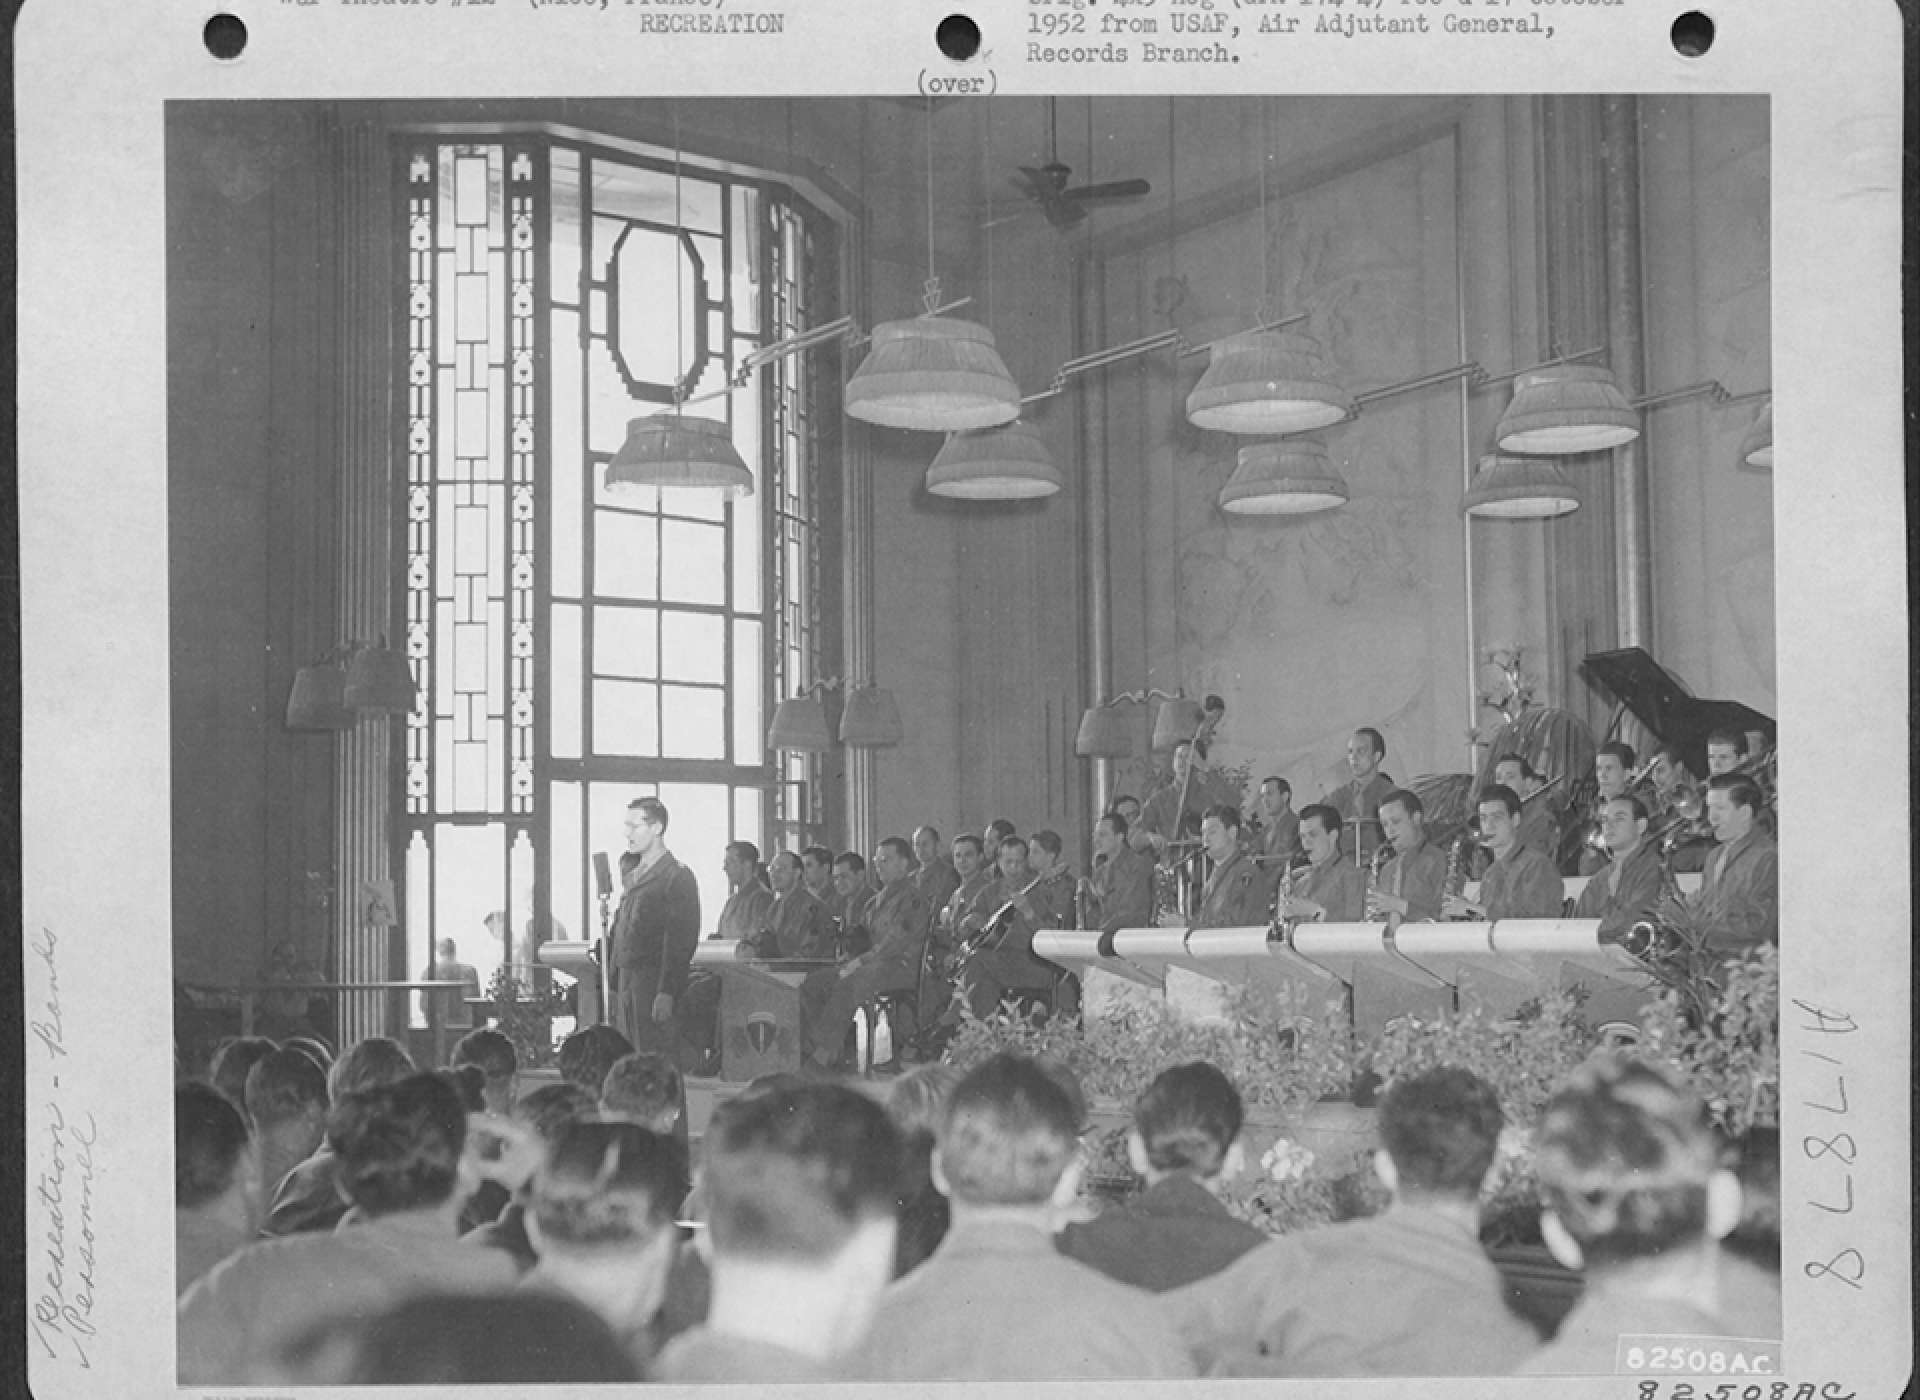 The Army Air Forces Band, directed by Ray MacKinley after Miller’s disappearance, plays for GIs on leave in Nice, France, May 1945. US Air Force photograph.